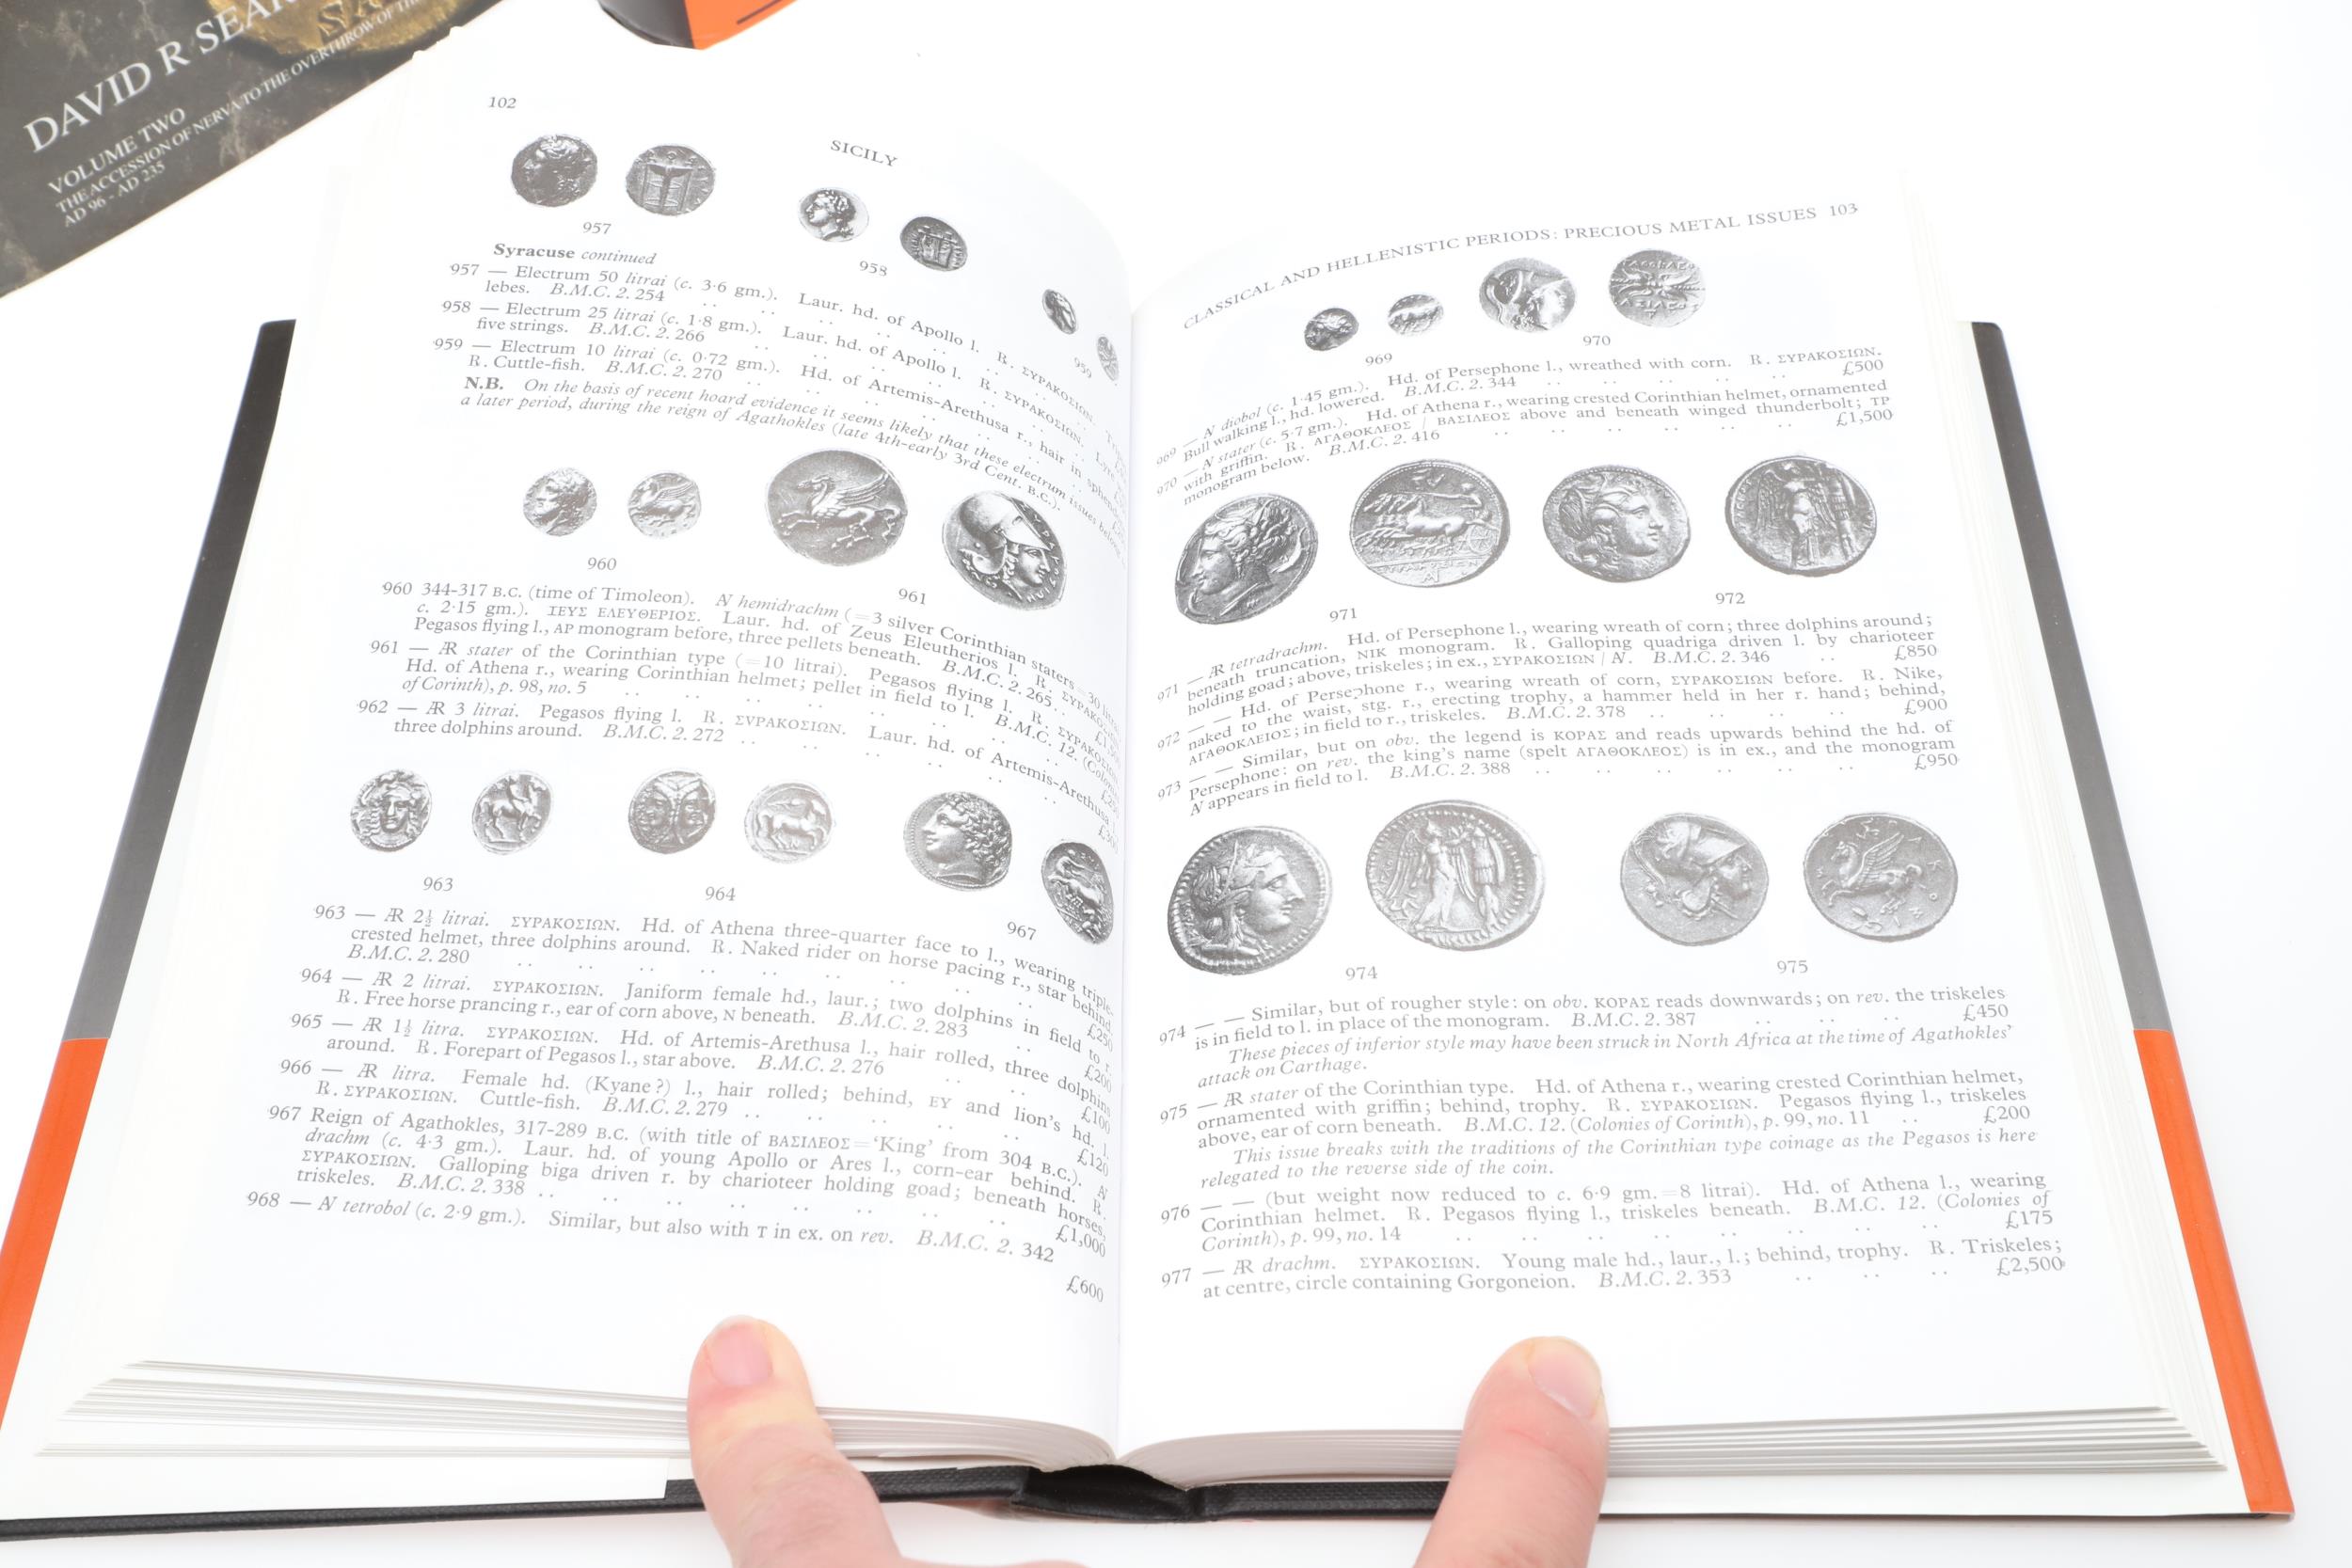 DAVID R. SEAR GREEK COINS AND THEIR VALUES AND ROMAN COINS AND THEIR VALUES. 4 VOLUMES. - Bild 8 aus 14